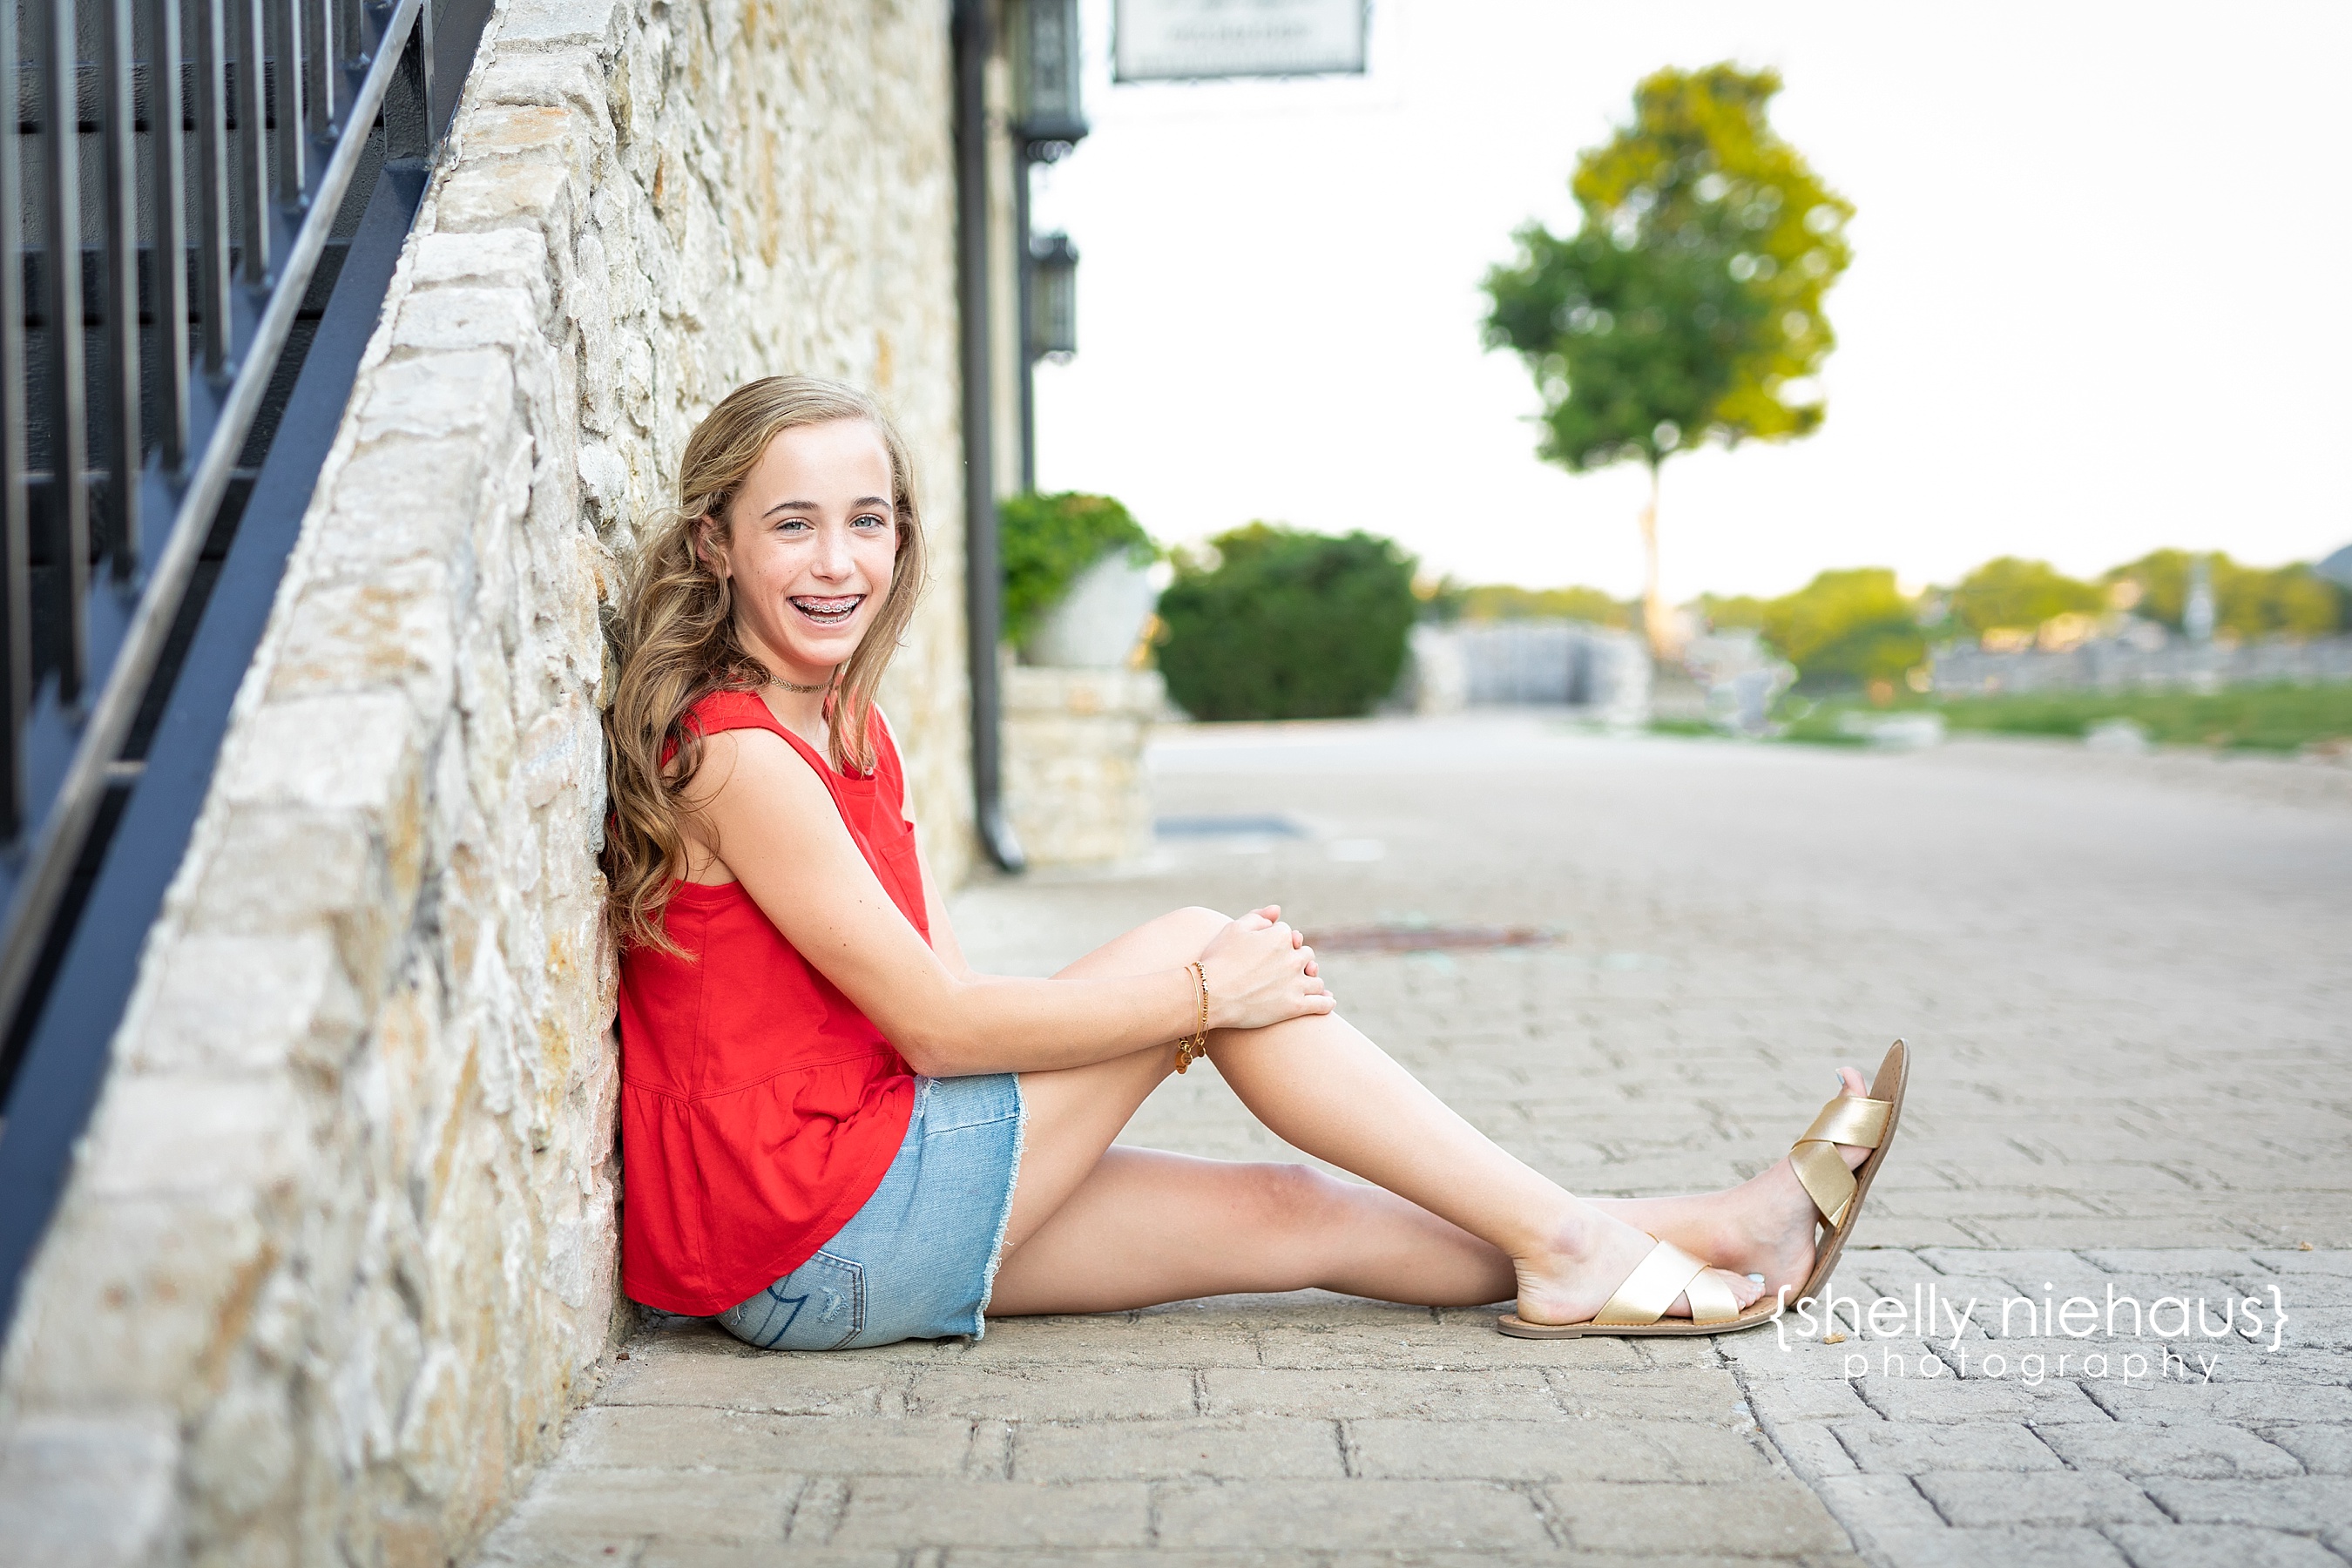 Tween photo session with 13 year old girl in red shirt and blue top in McKinney, TX by Shelly Niehaus Photography.